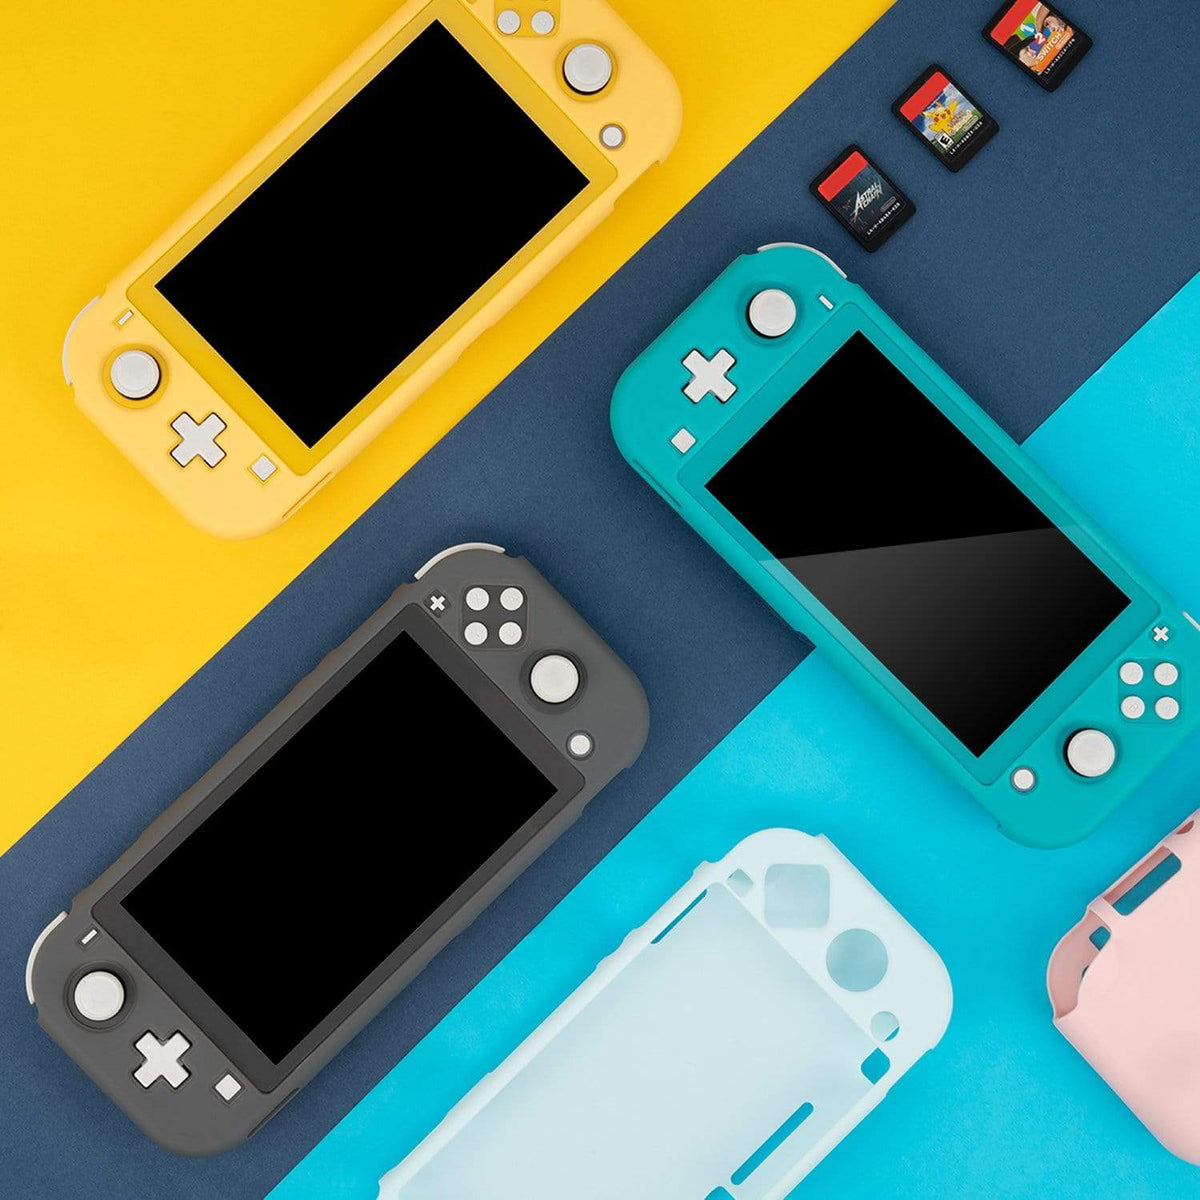 Cinnamoroll Baby Blue Nintendo Switch Skin – Lux Skins Official